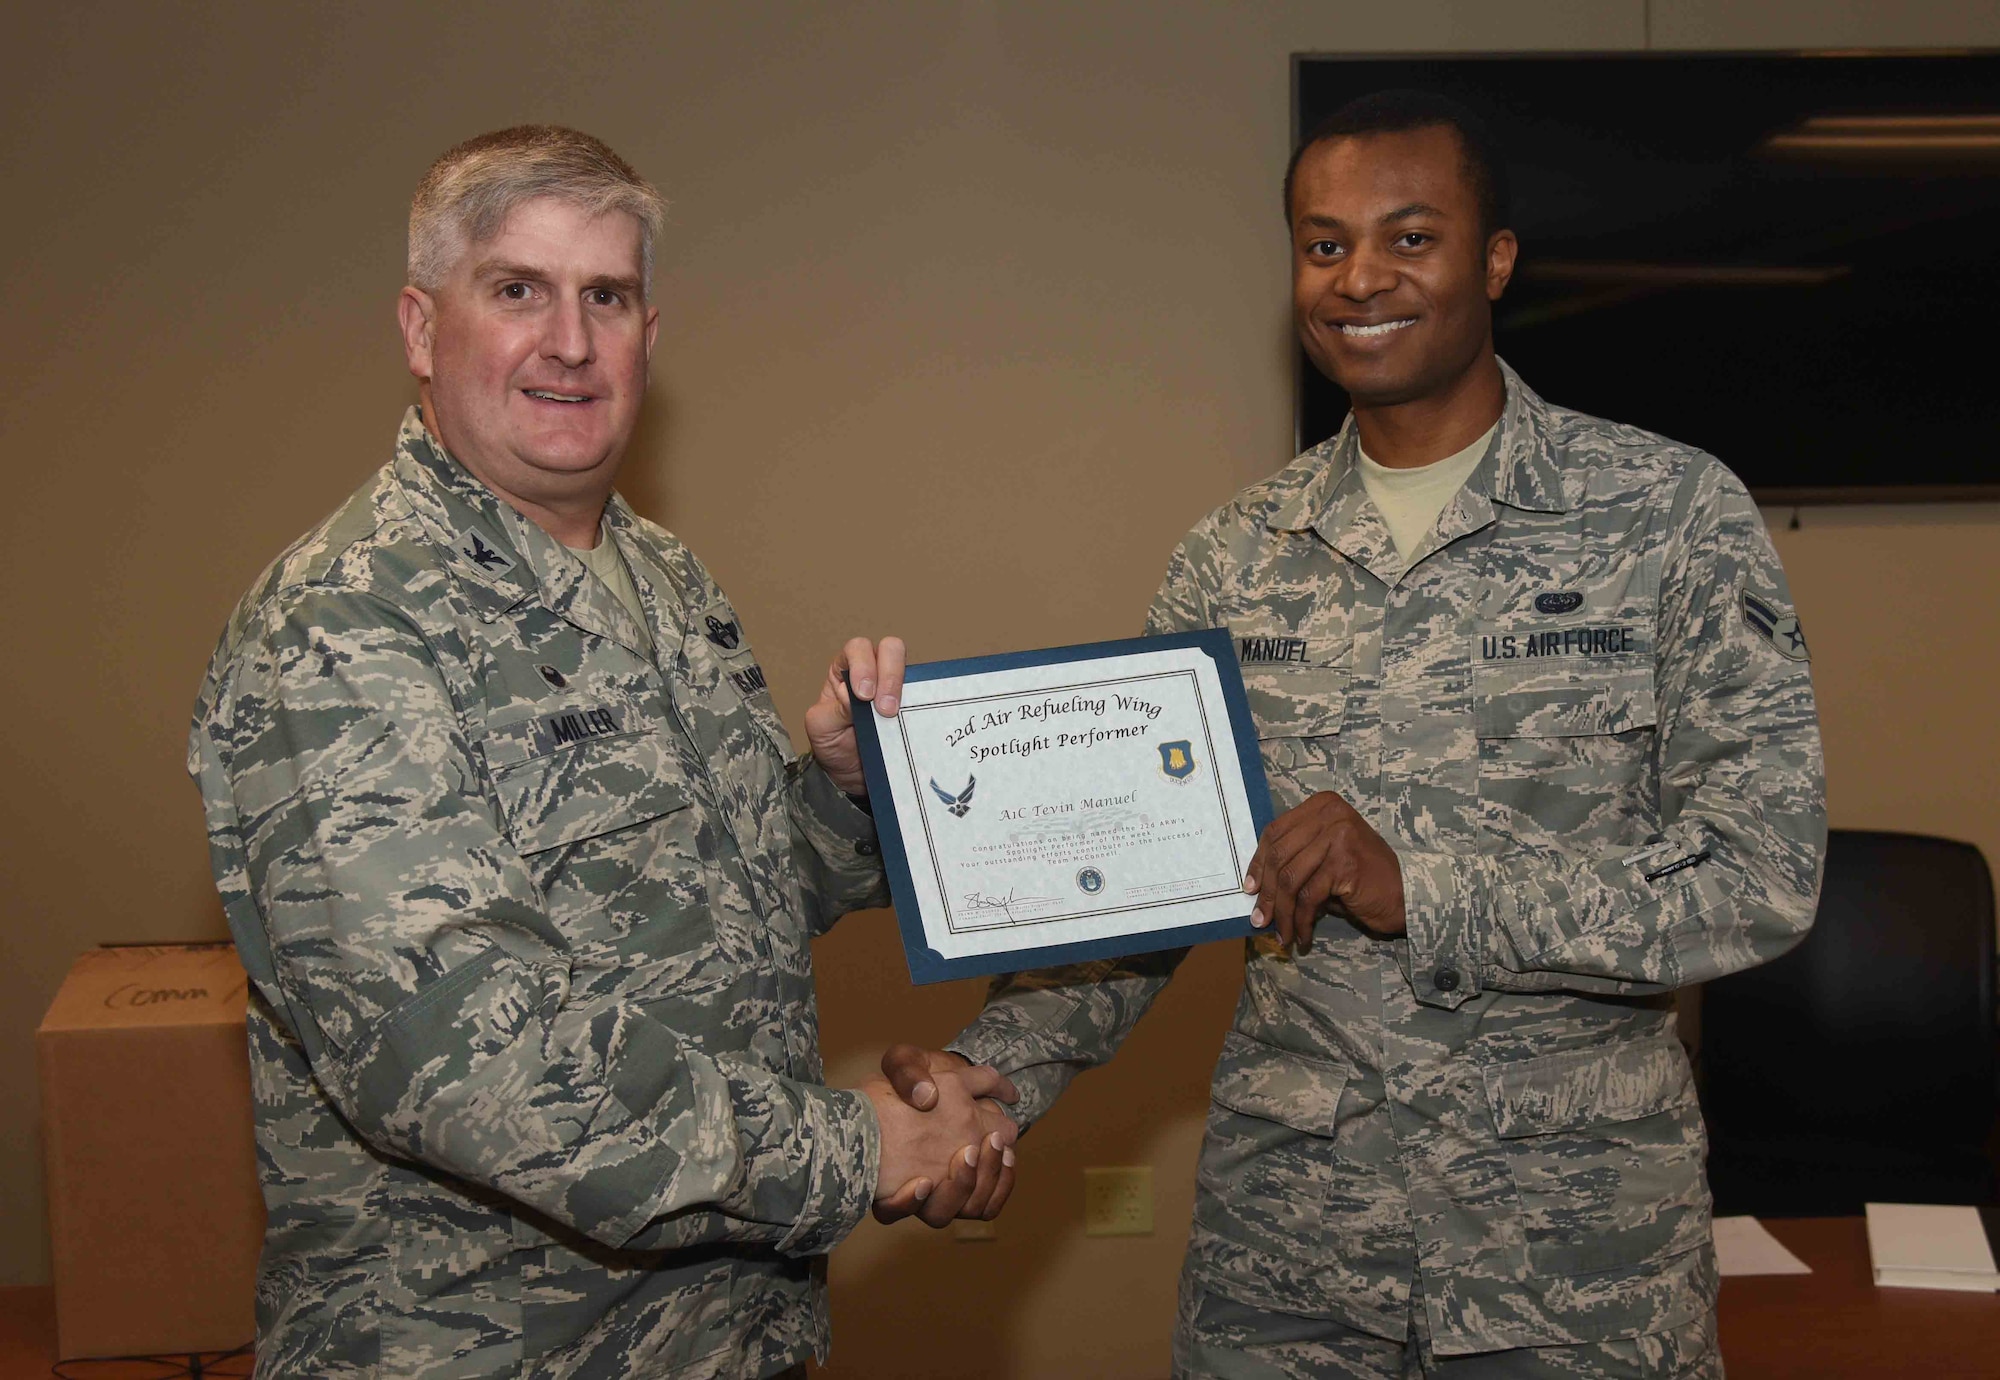 Airman 1st Class Tevin Manuel, 22nd Communications Squadron cyber surety technician, receives a certificate from Col. Albert Miller, 22nd Air Refueling Wing commander, May 18, 2017, at McConnell Air Force Base, Kan. Manuel earned the spotlight performer for the week of April 24-28. (U.S. Air Force photo/Airman 1st Class Erin McClellan)